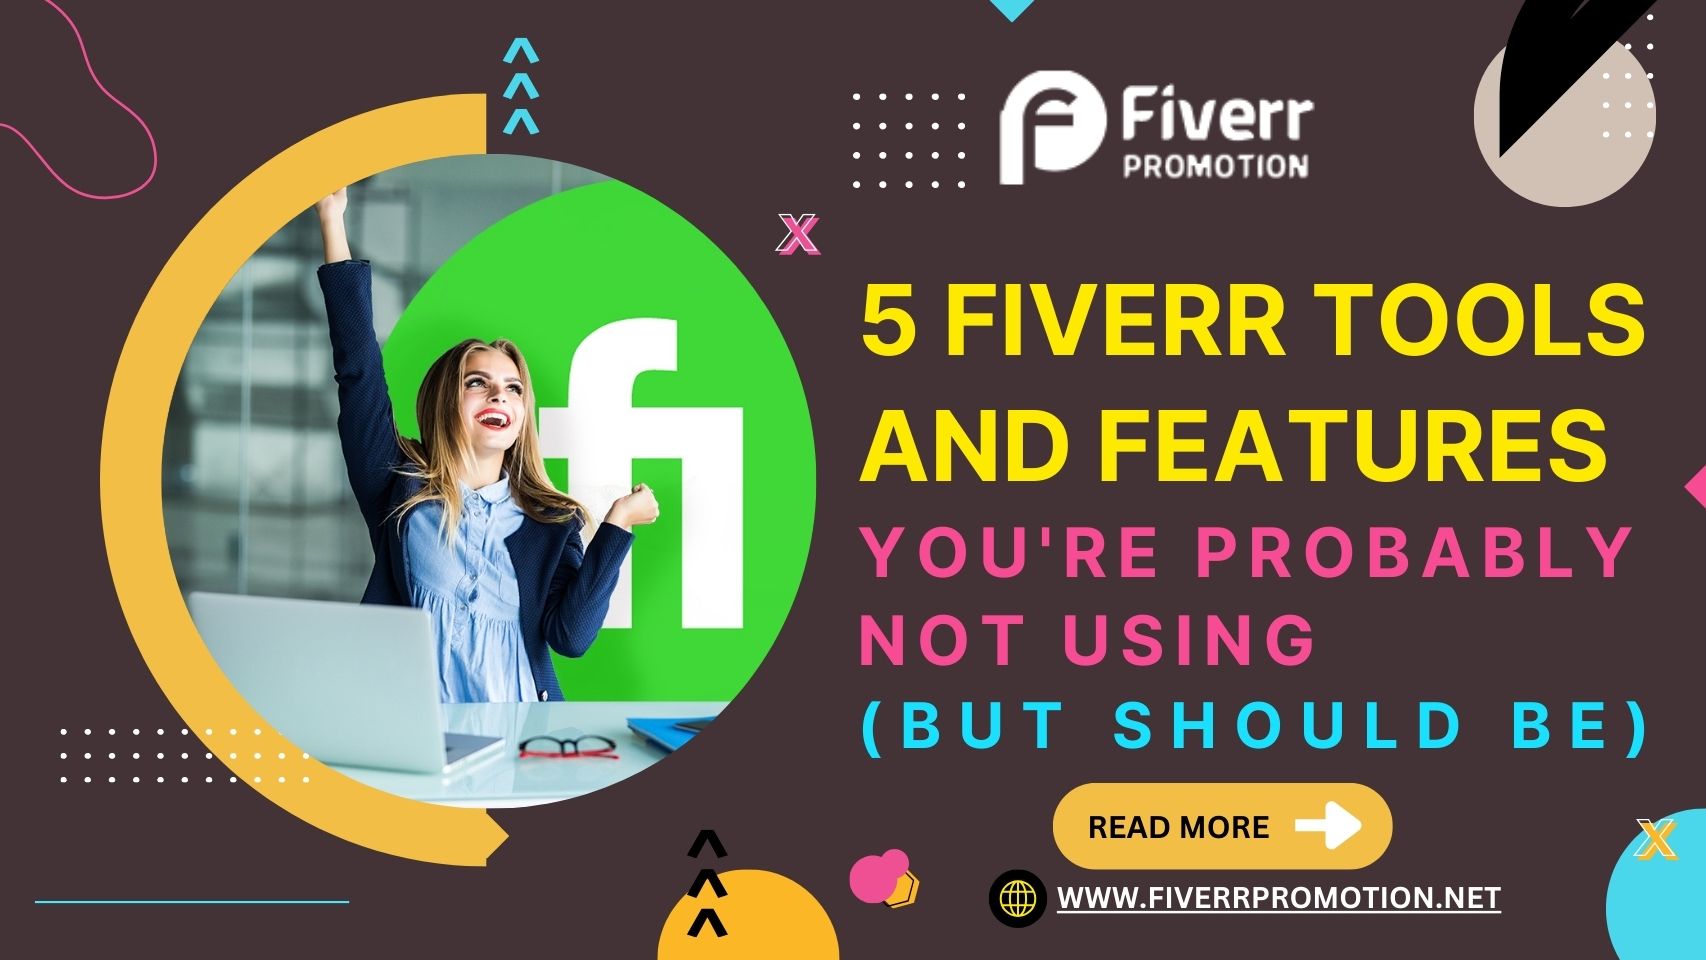 5 Fiverr Tools and Features You’re Probably Not Using (But Should Be)